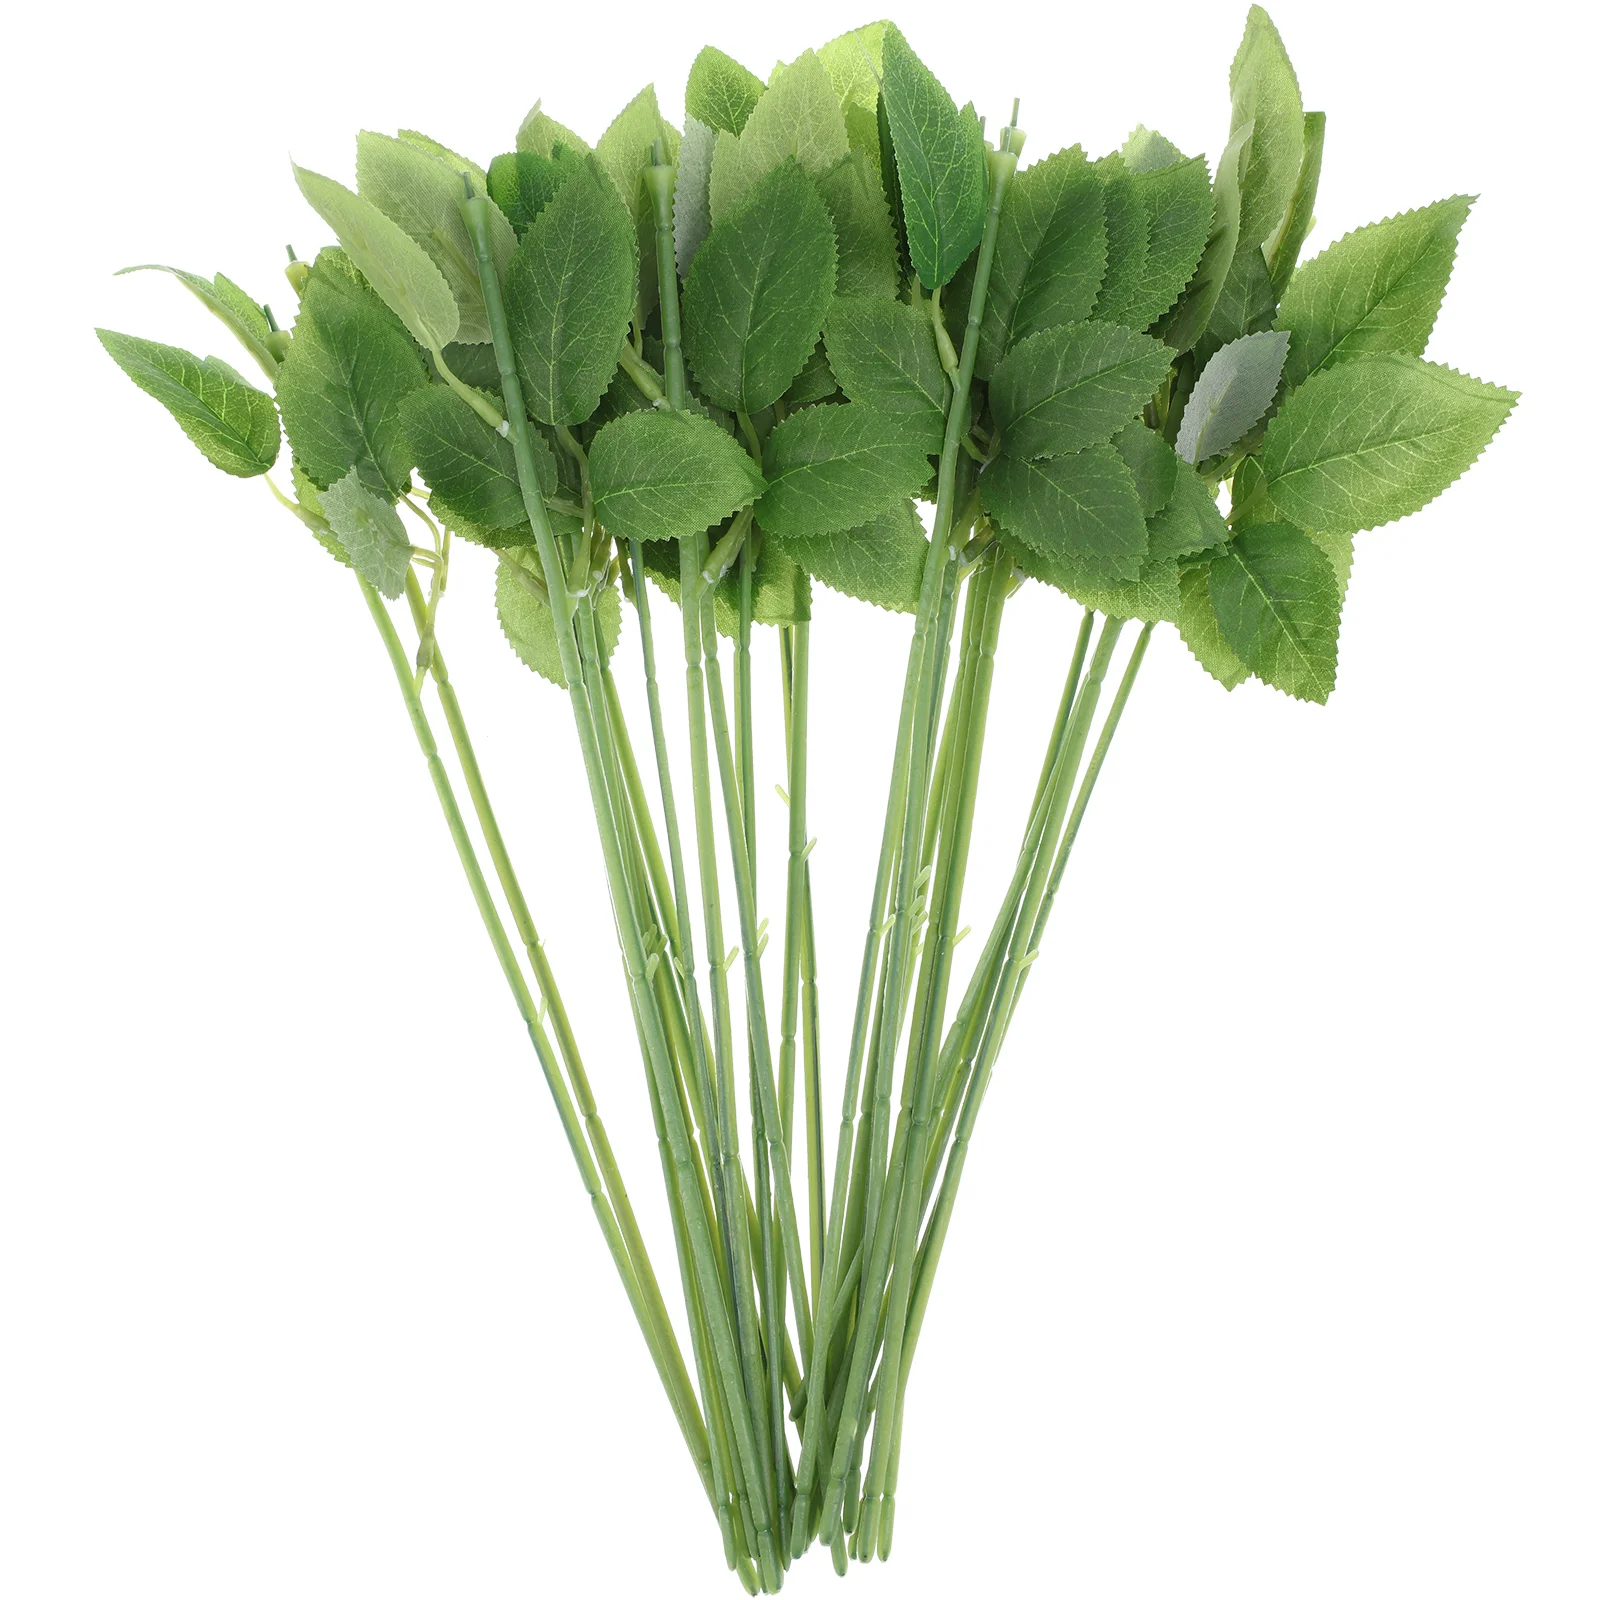 

30pcs Rose Flower Stem Green Floral Stem with Leaves Artificial Branches Floral Wire for DIY Crafts and Flower Arrangements